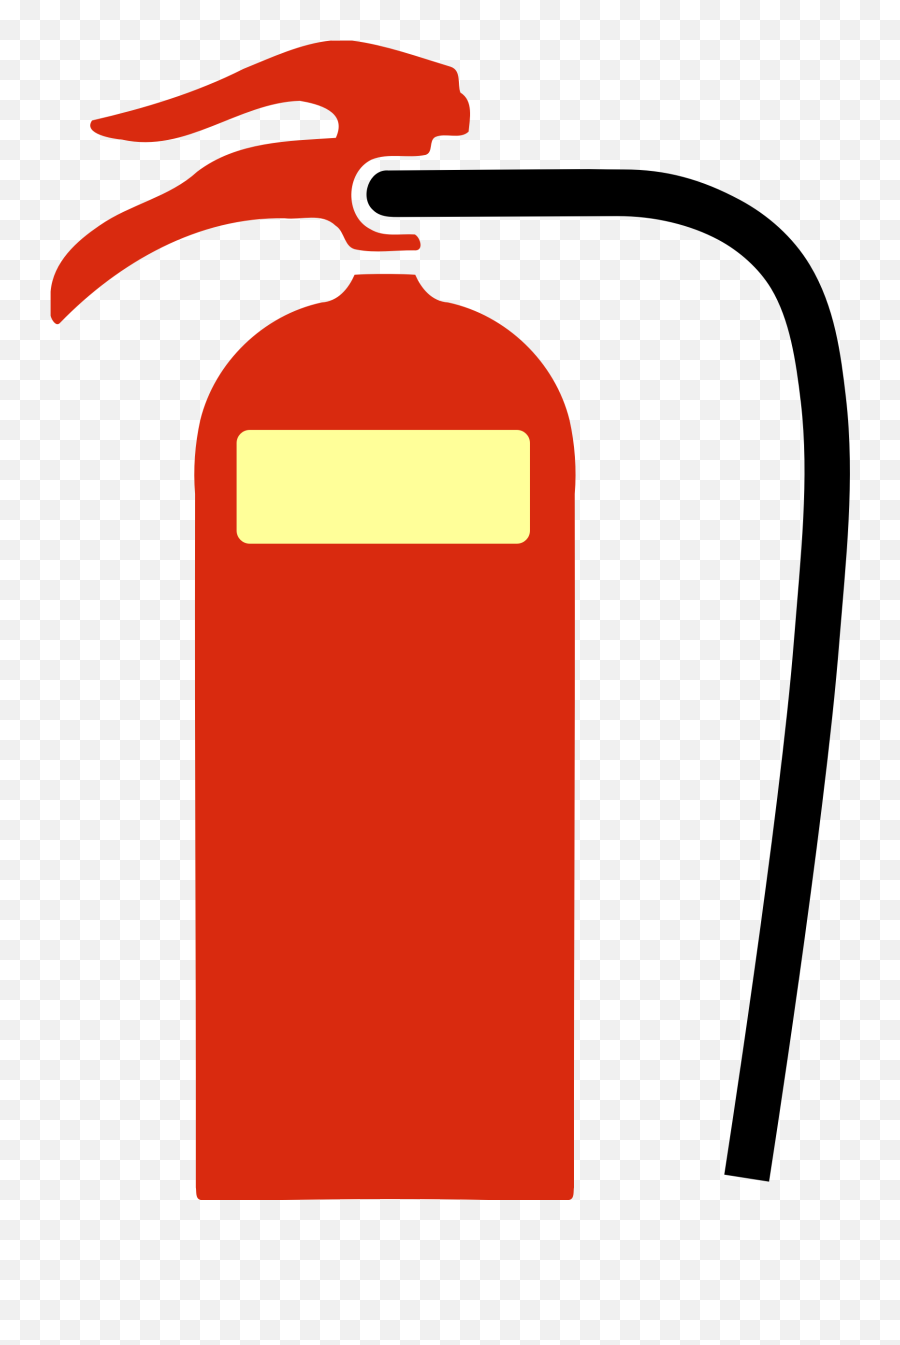 Fire Border Png - Firefighter Clipart Fire Extinguisher Transparent Background Fire Extinguisher Icon Png Emoji,Firefighter Clipart